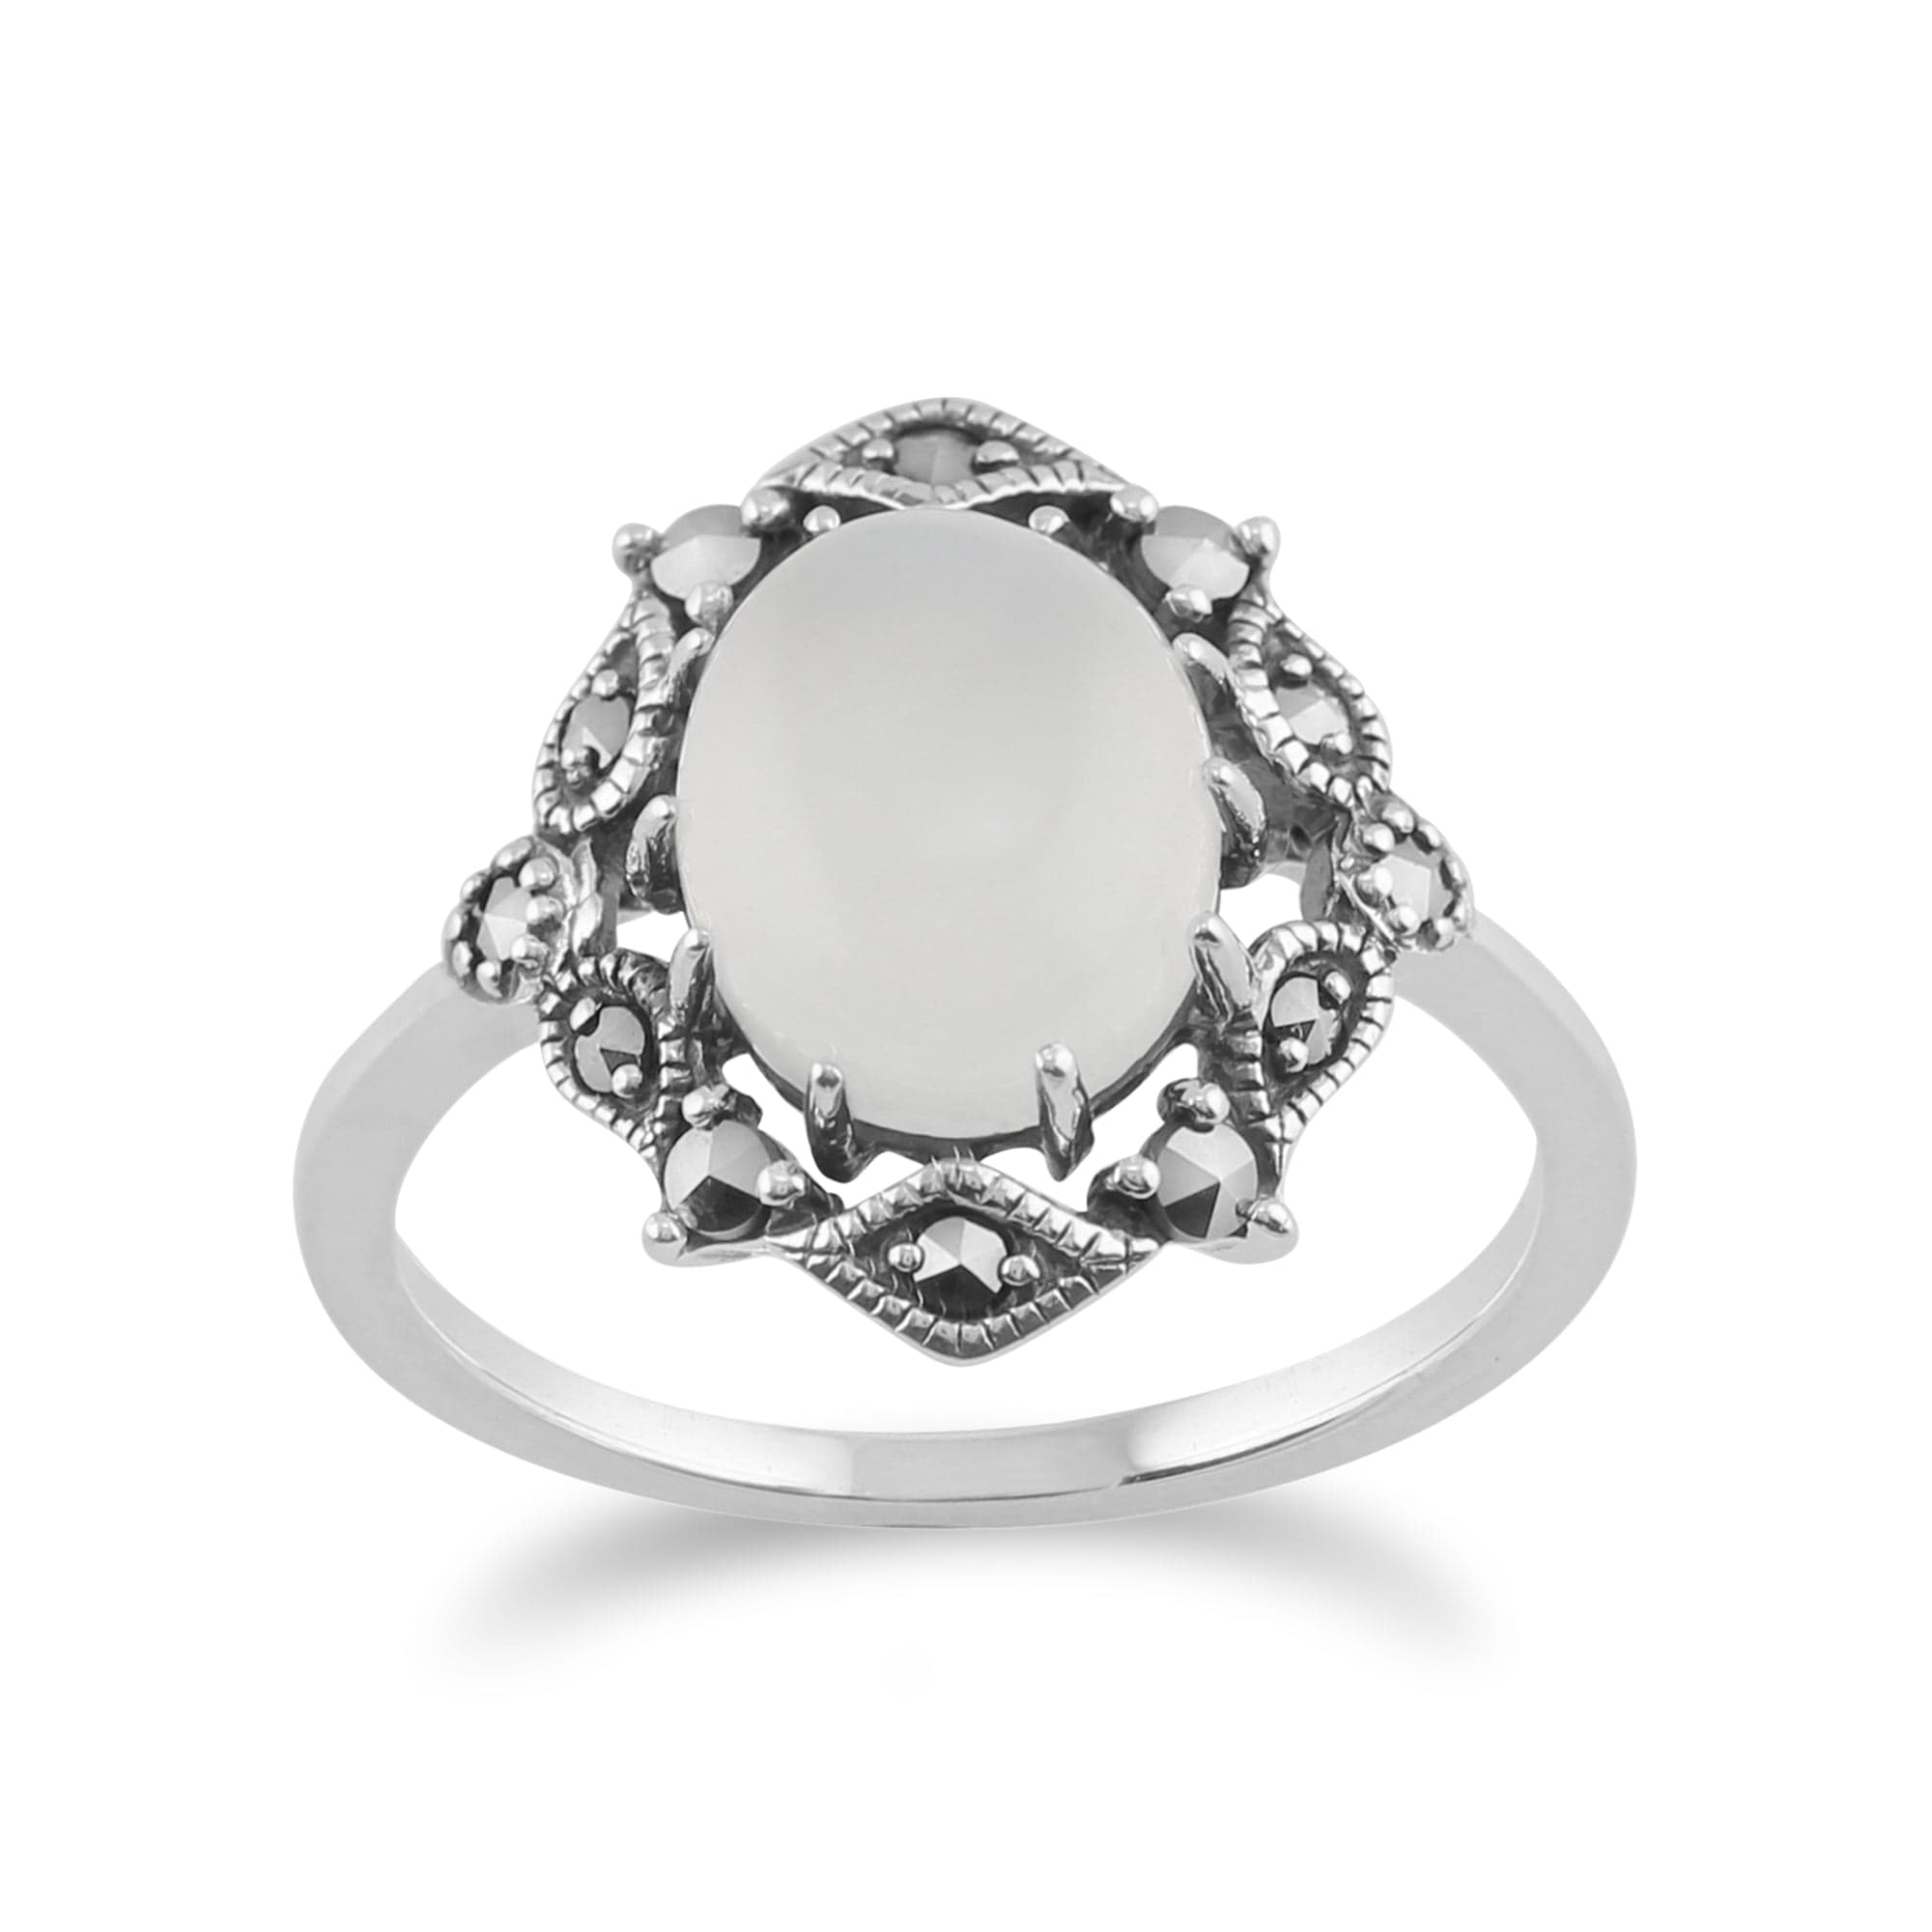 Art Nouveau Style Oval Moonstone Cabochon & Marcasite Statement Ring in 925 Sterling Silver - Gemondo